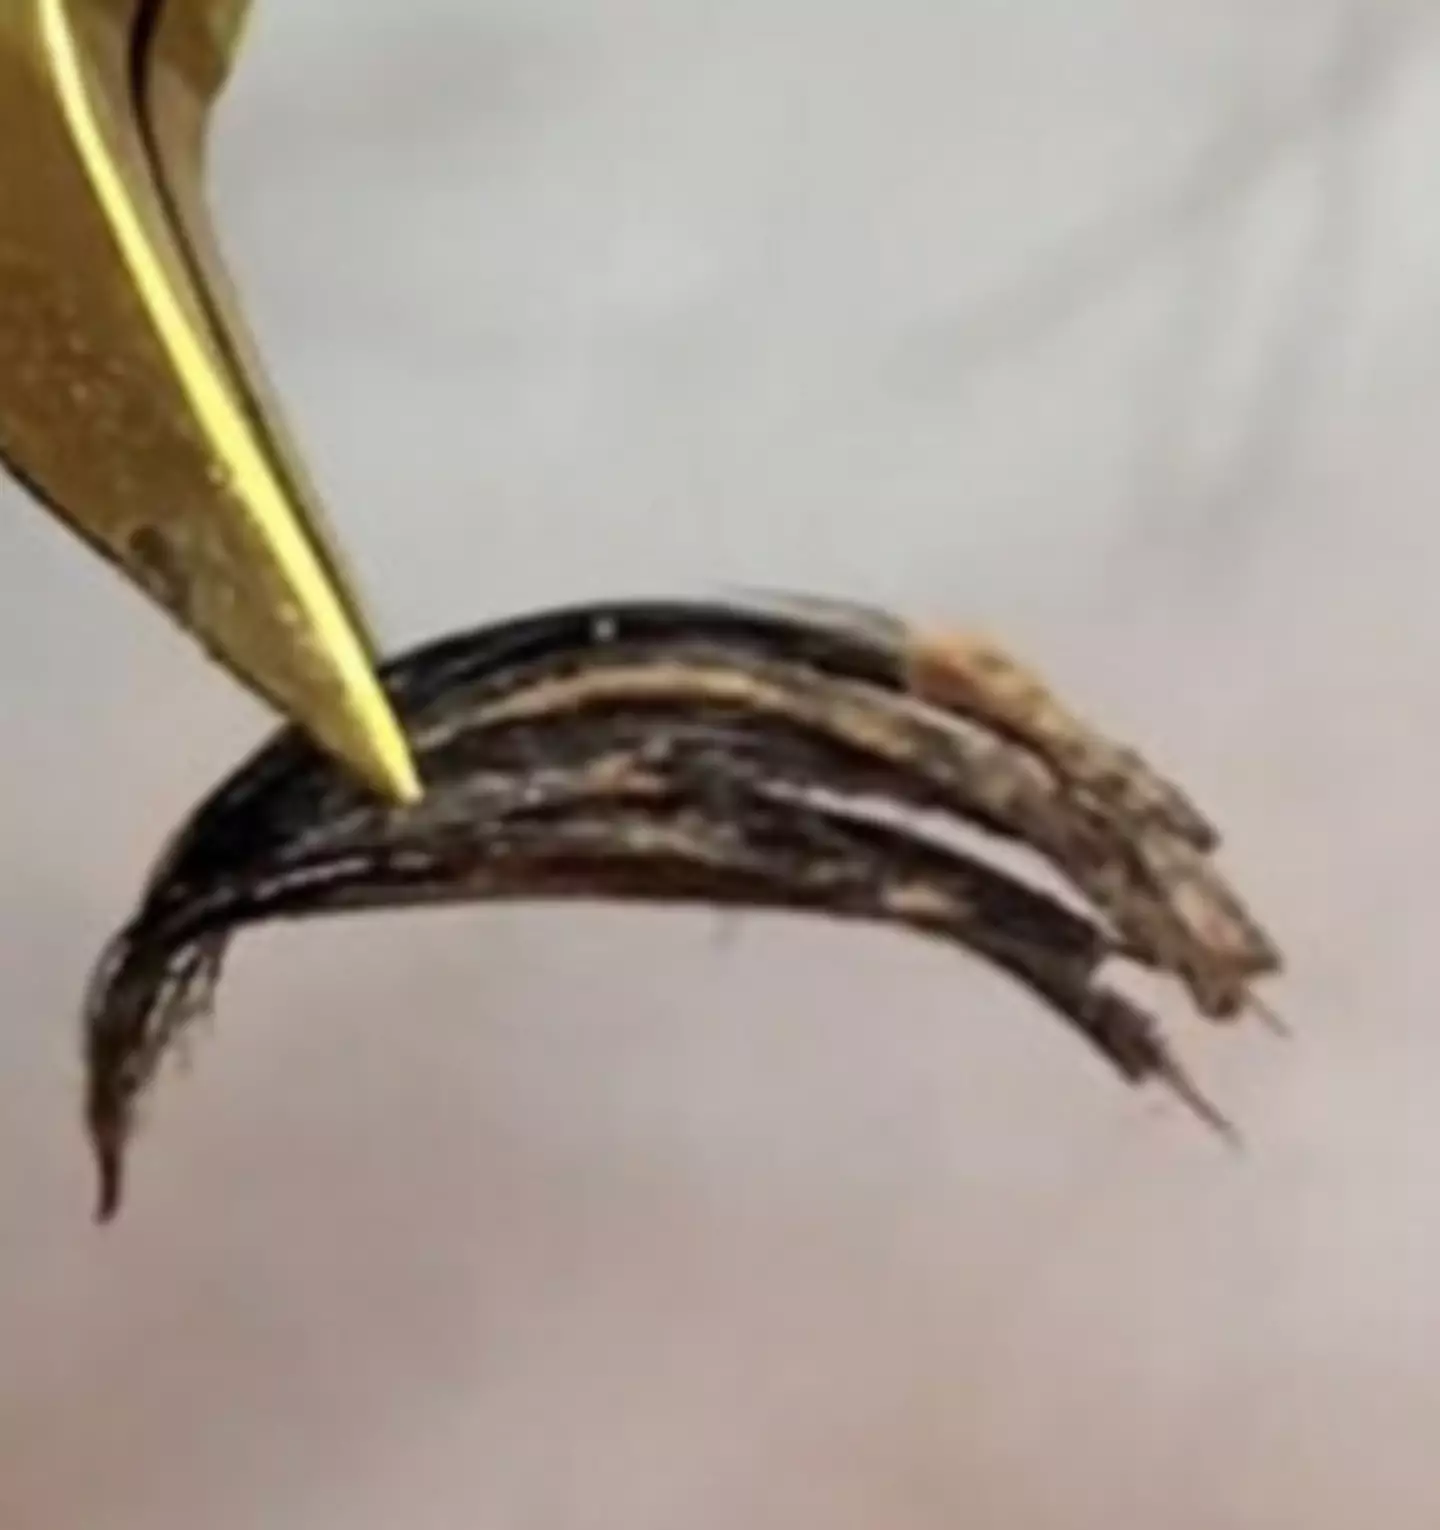 Users thought the makeup-clumped eyelashes were 'spiders' or 'crickets.'